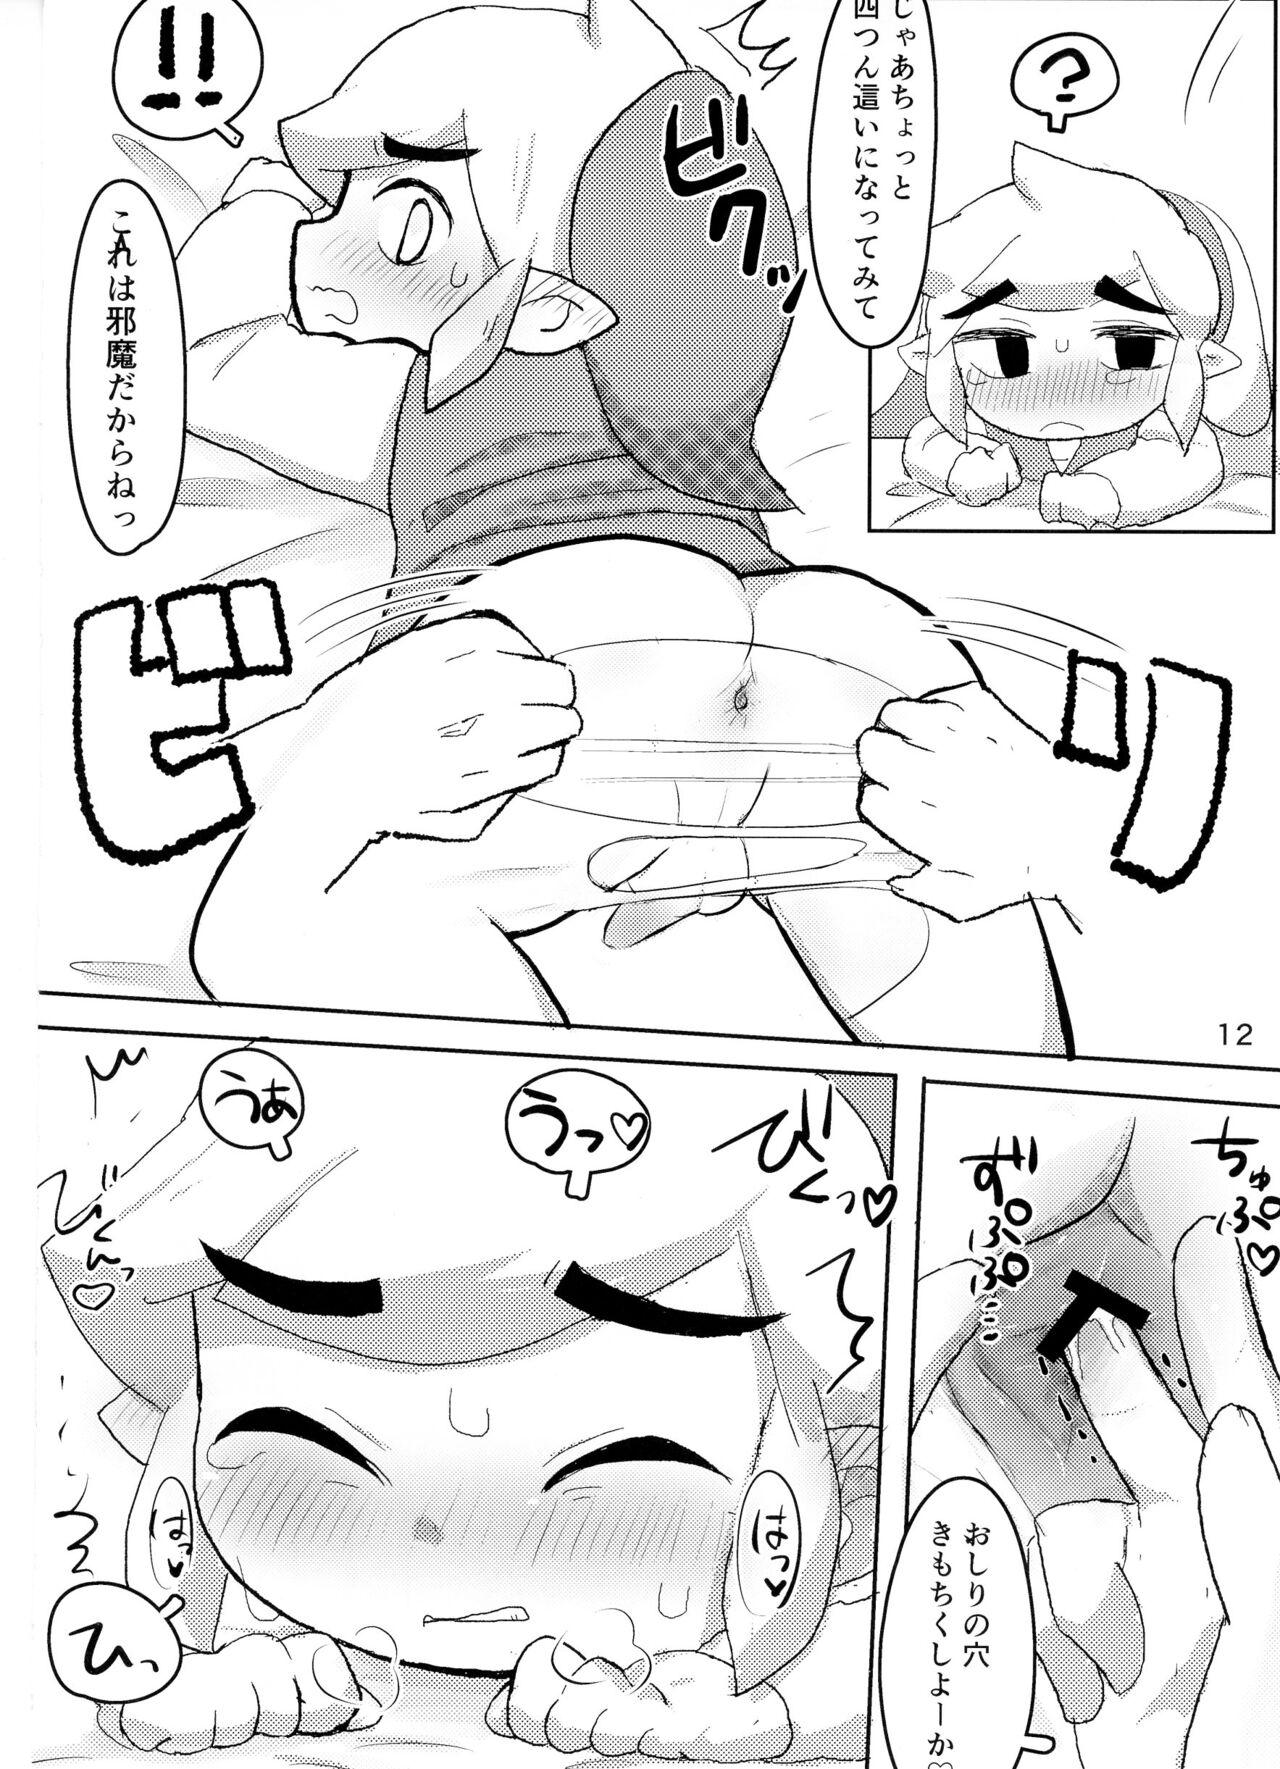 Toon Link's Book of Sexual Harassment 12